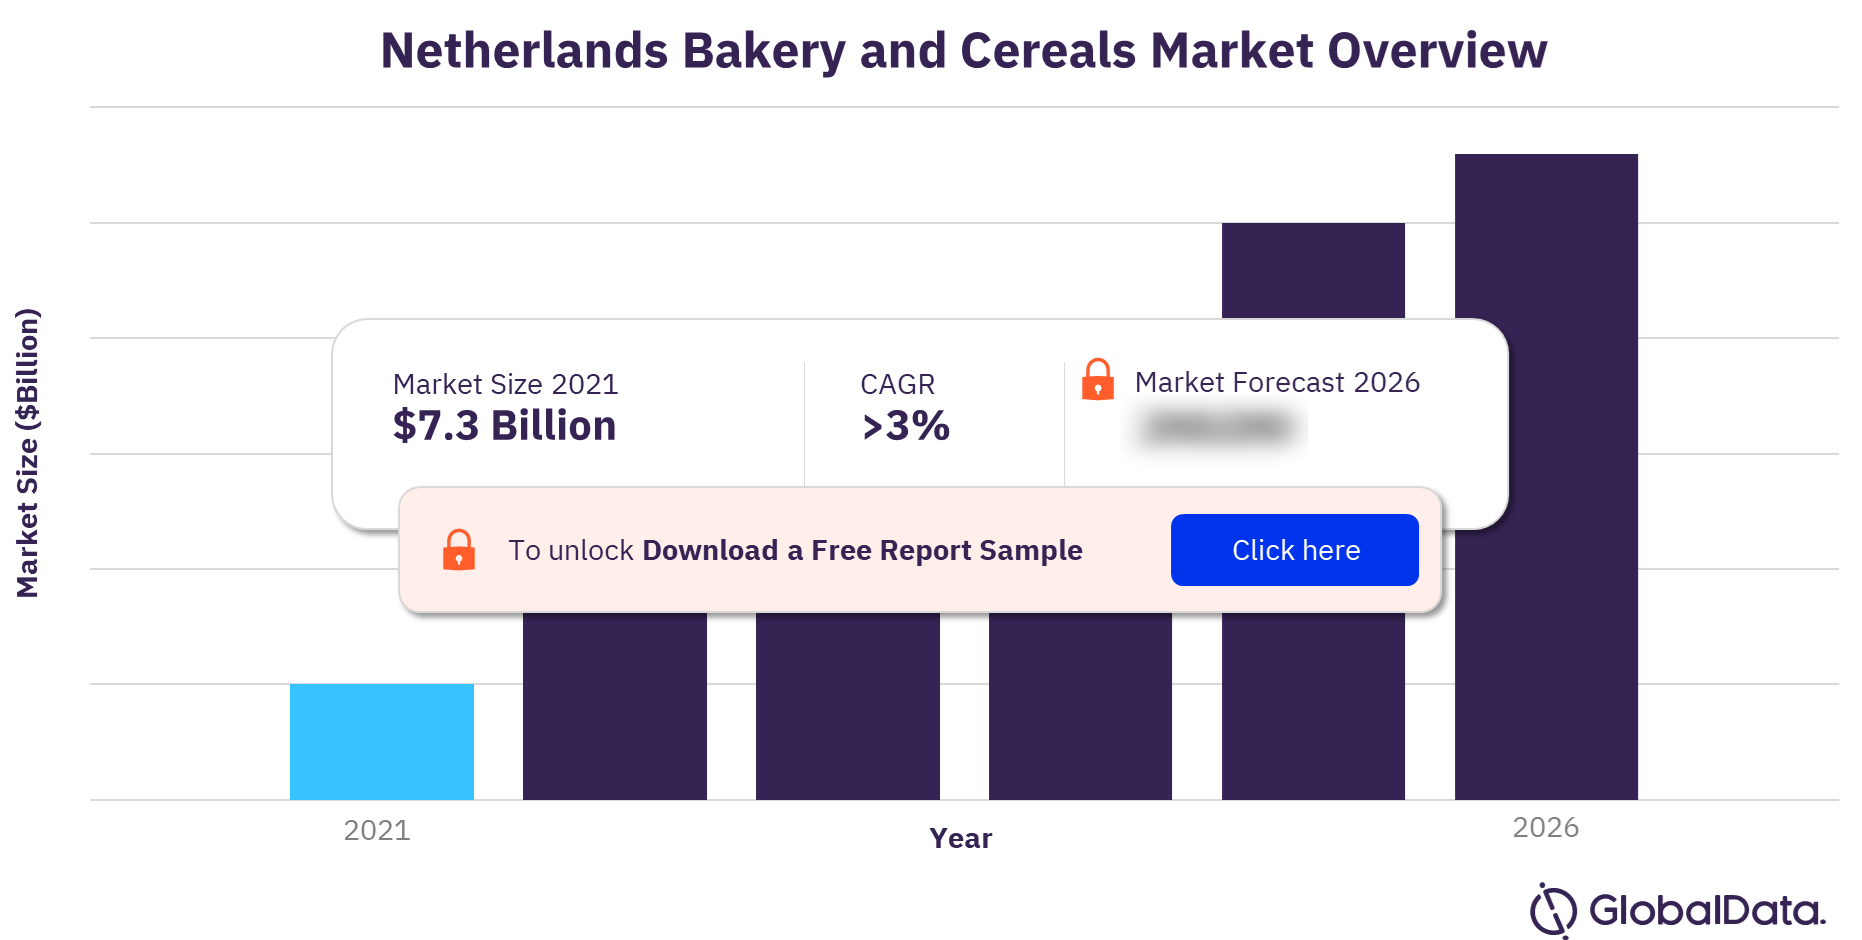 Netherlands bakery and cereals market overview 